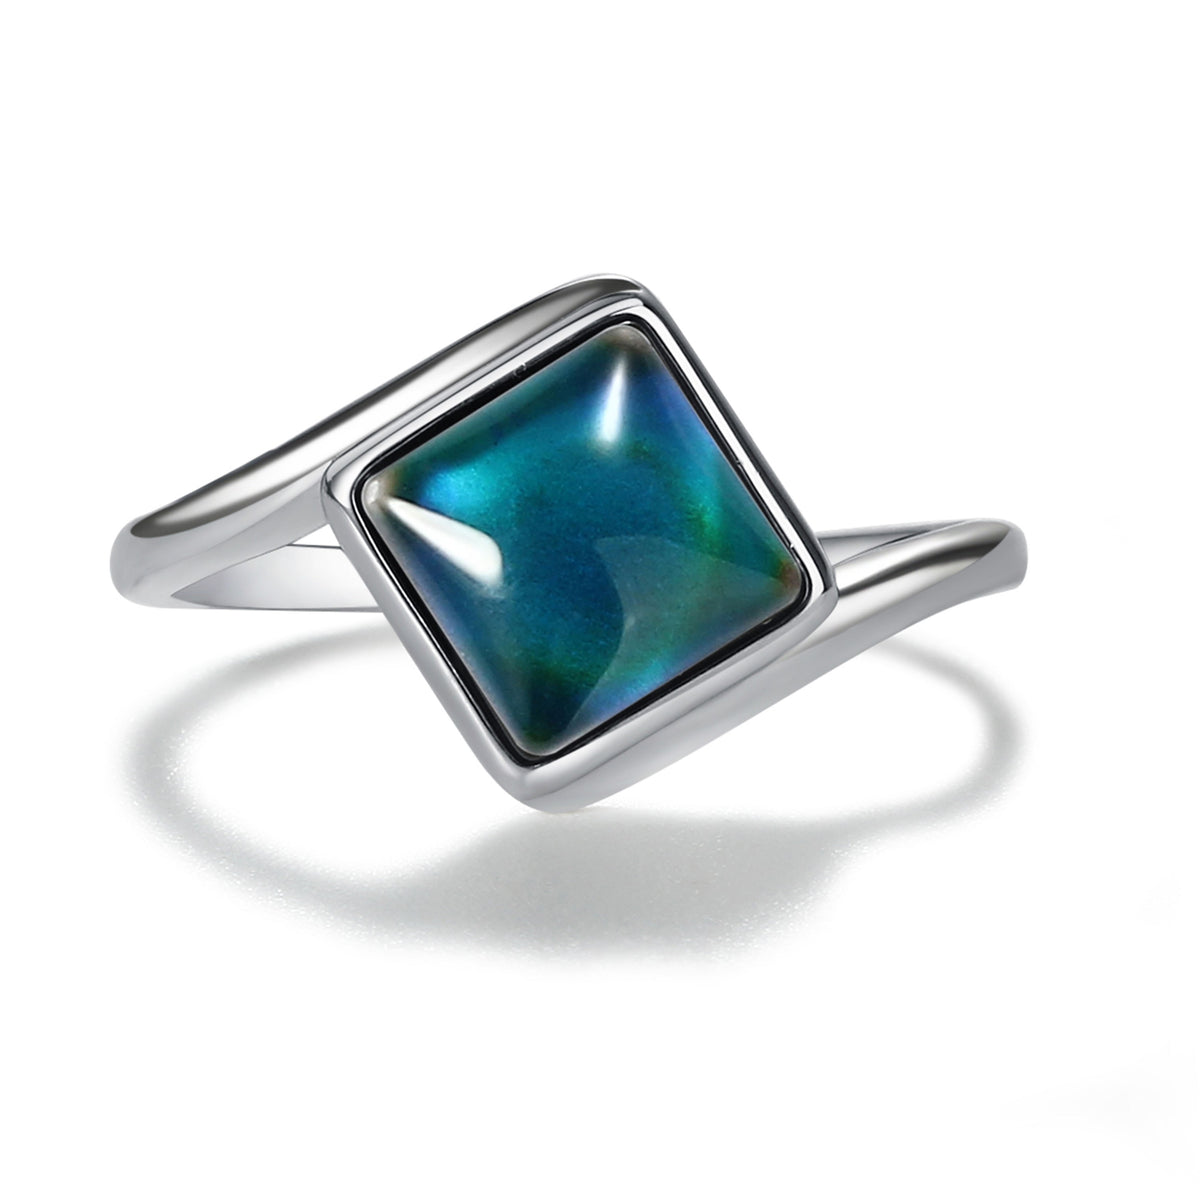 Sterling Silver Color Changing Square Mood Ring for Children and